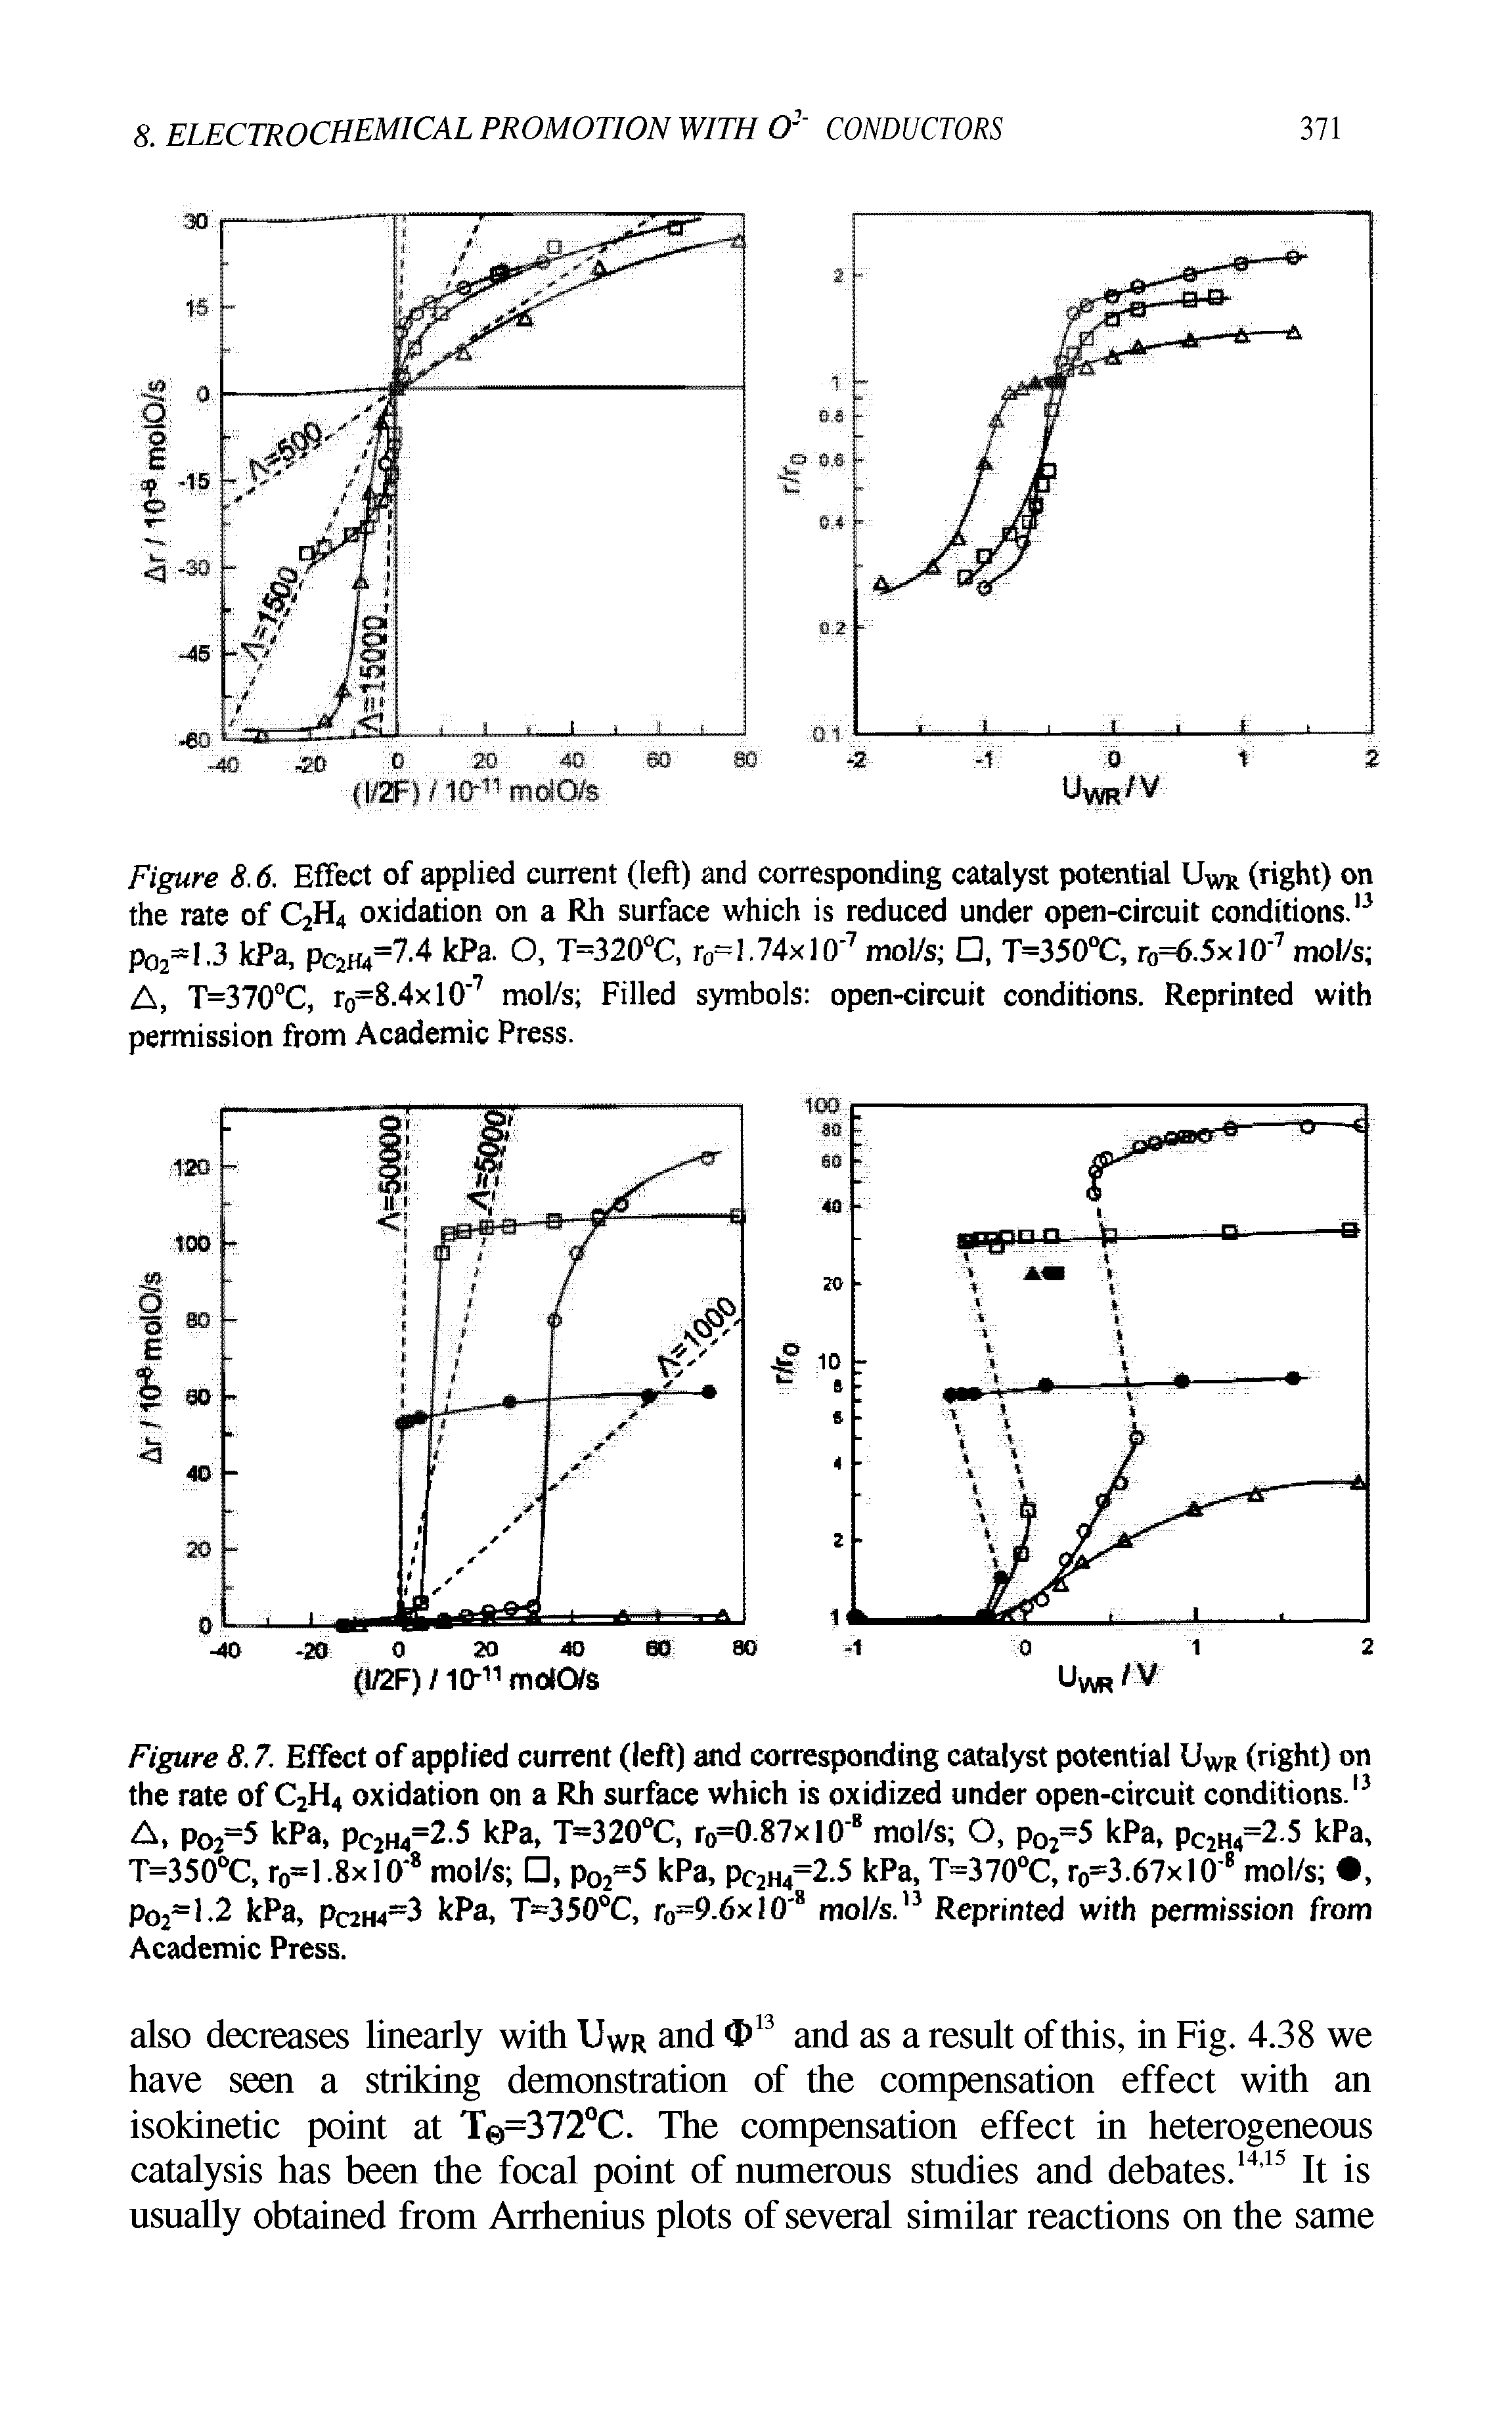 Figure 8.6. Effect of applied current (left) and corresponding catalyst potential Uw (right) on the rate of C2H4 oxidation on a Rh surface which is reduced under open-circuit conditions.13 Pq2 1.3 kPa, pc2H4=7.4 kPa. O, T=320°C, r0= 1.74x1 O 7 mol/s , T=350°C, ro=6.5x]0 7 mol/s A, T=370°C, r0=8.4xlO 7 mol/s Filled symbols open-circuit conditions. Reprinted with permission from Academic Press.